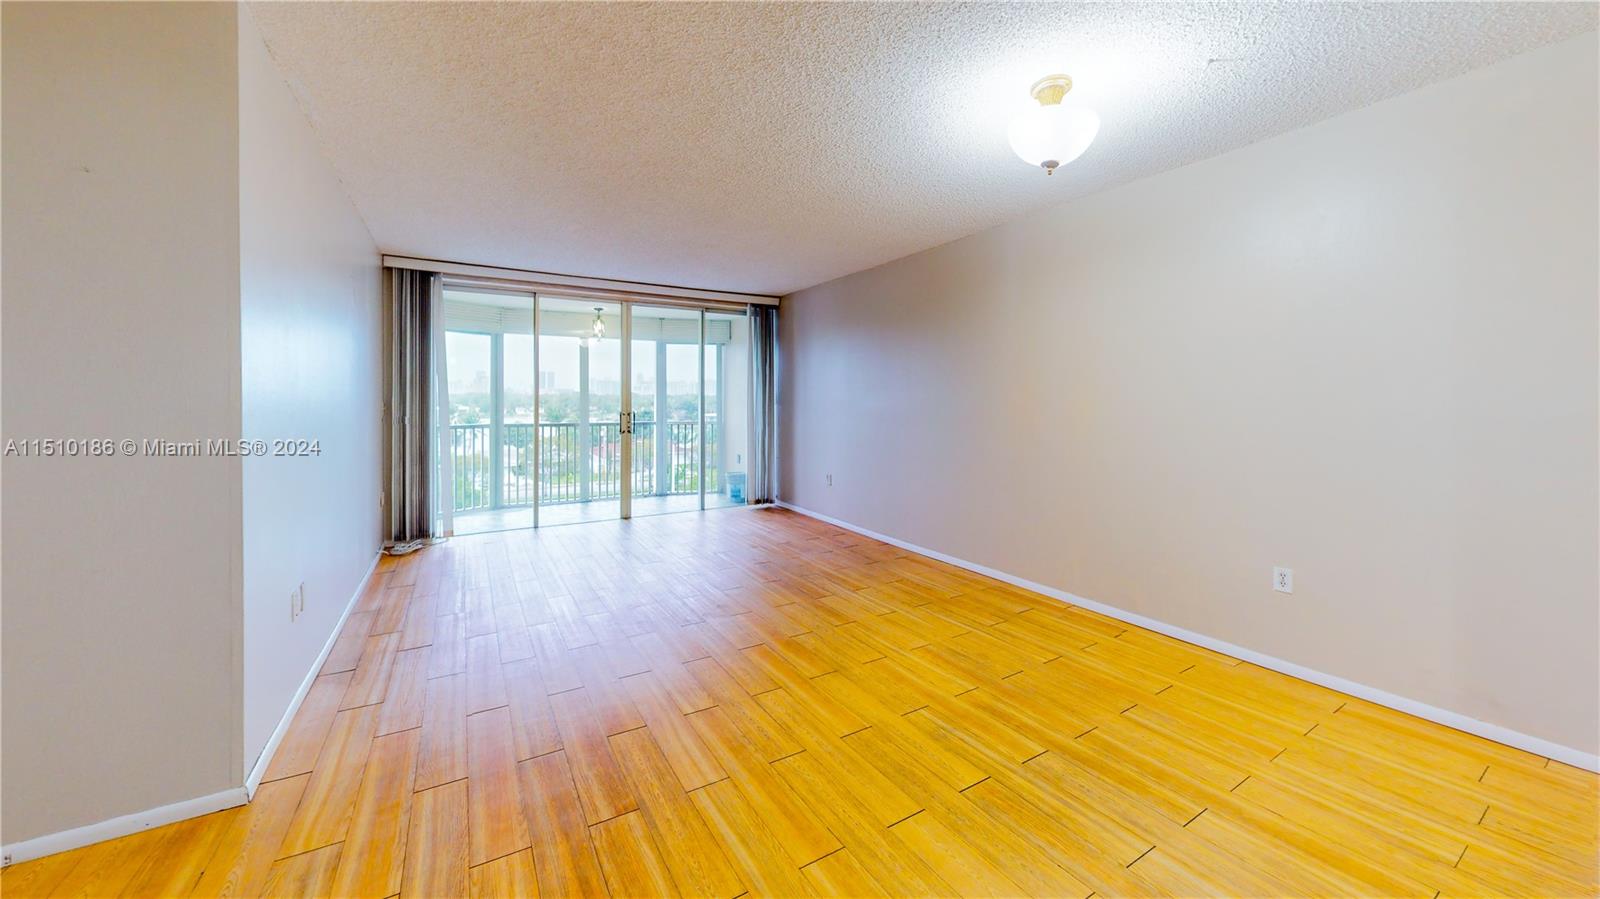 1780 NE 191st St 606-2, Miami, Florida 33179, 1 Bedroom Bedrooms, ,1 BathroomBathrooms,Residential,For Sale,1780 NE 191st St 606-2,A11510186